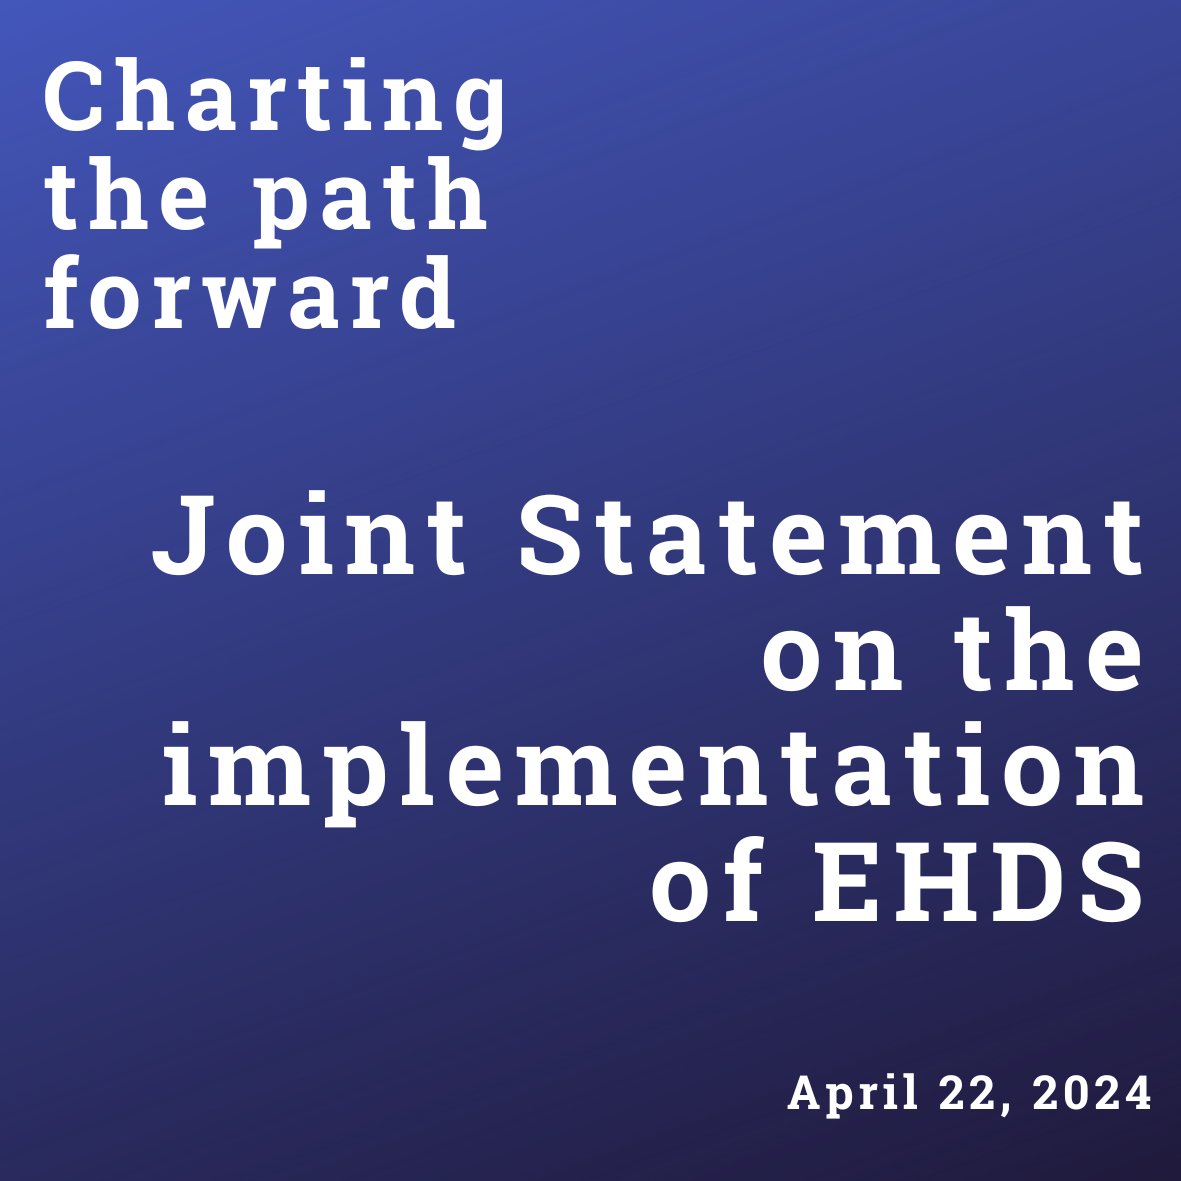 📣Join us in advancing the European Health Data Space #EHDS! As the final vote for the EHDS happens in European Parliament this week, ECL Cancer Leagues and partners are committed to ensuring patient-centric solutions. Full joint statement here: cancer.eu/wp-content/upl…